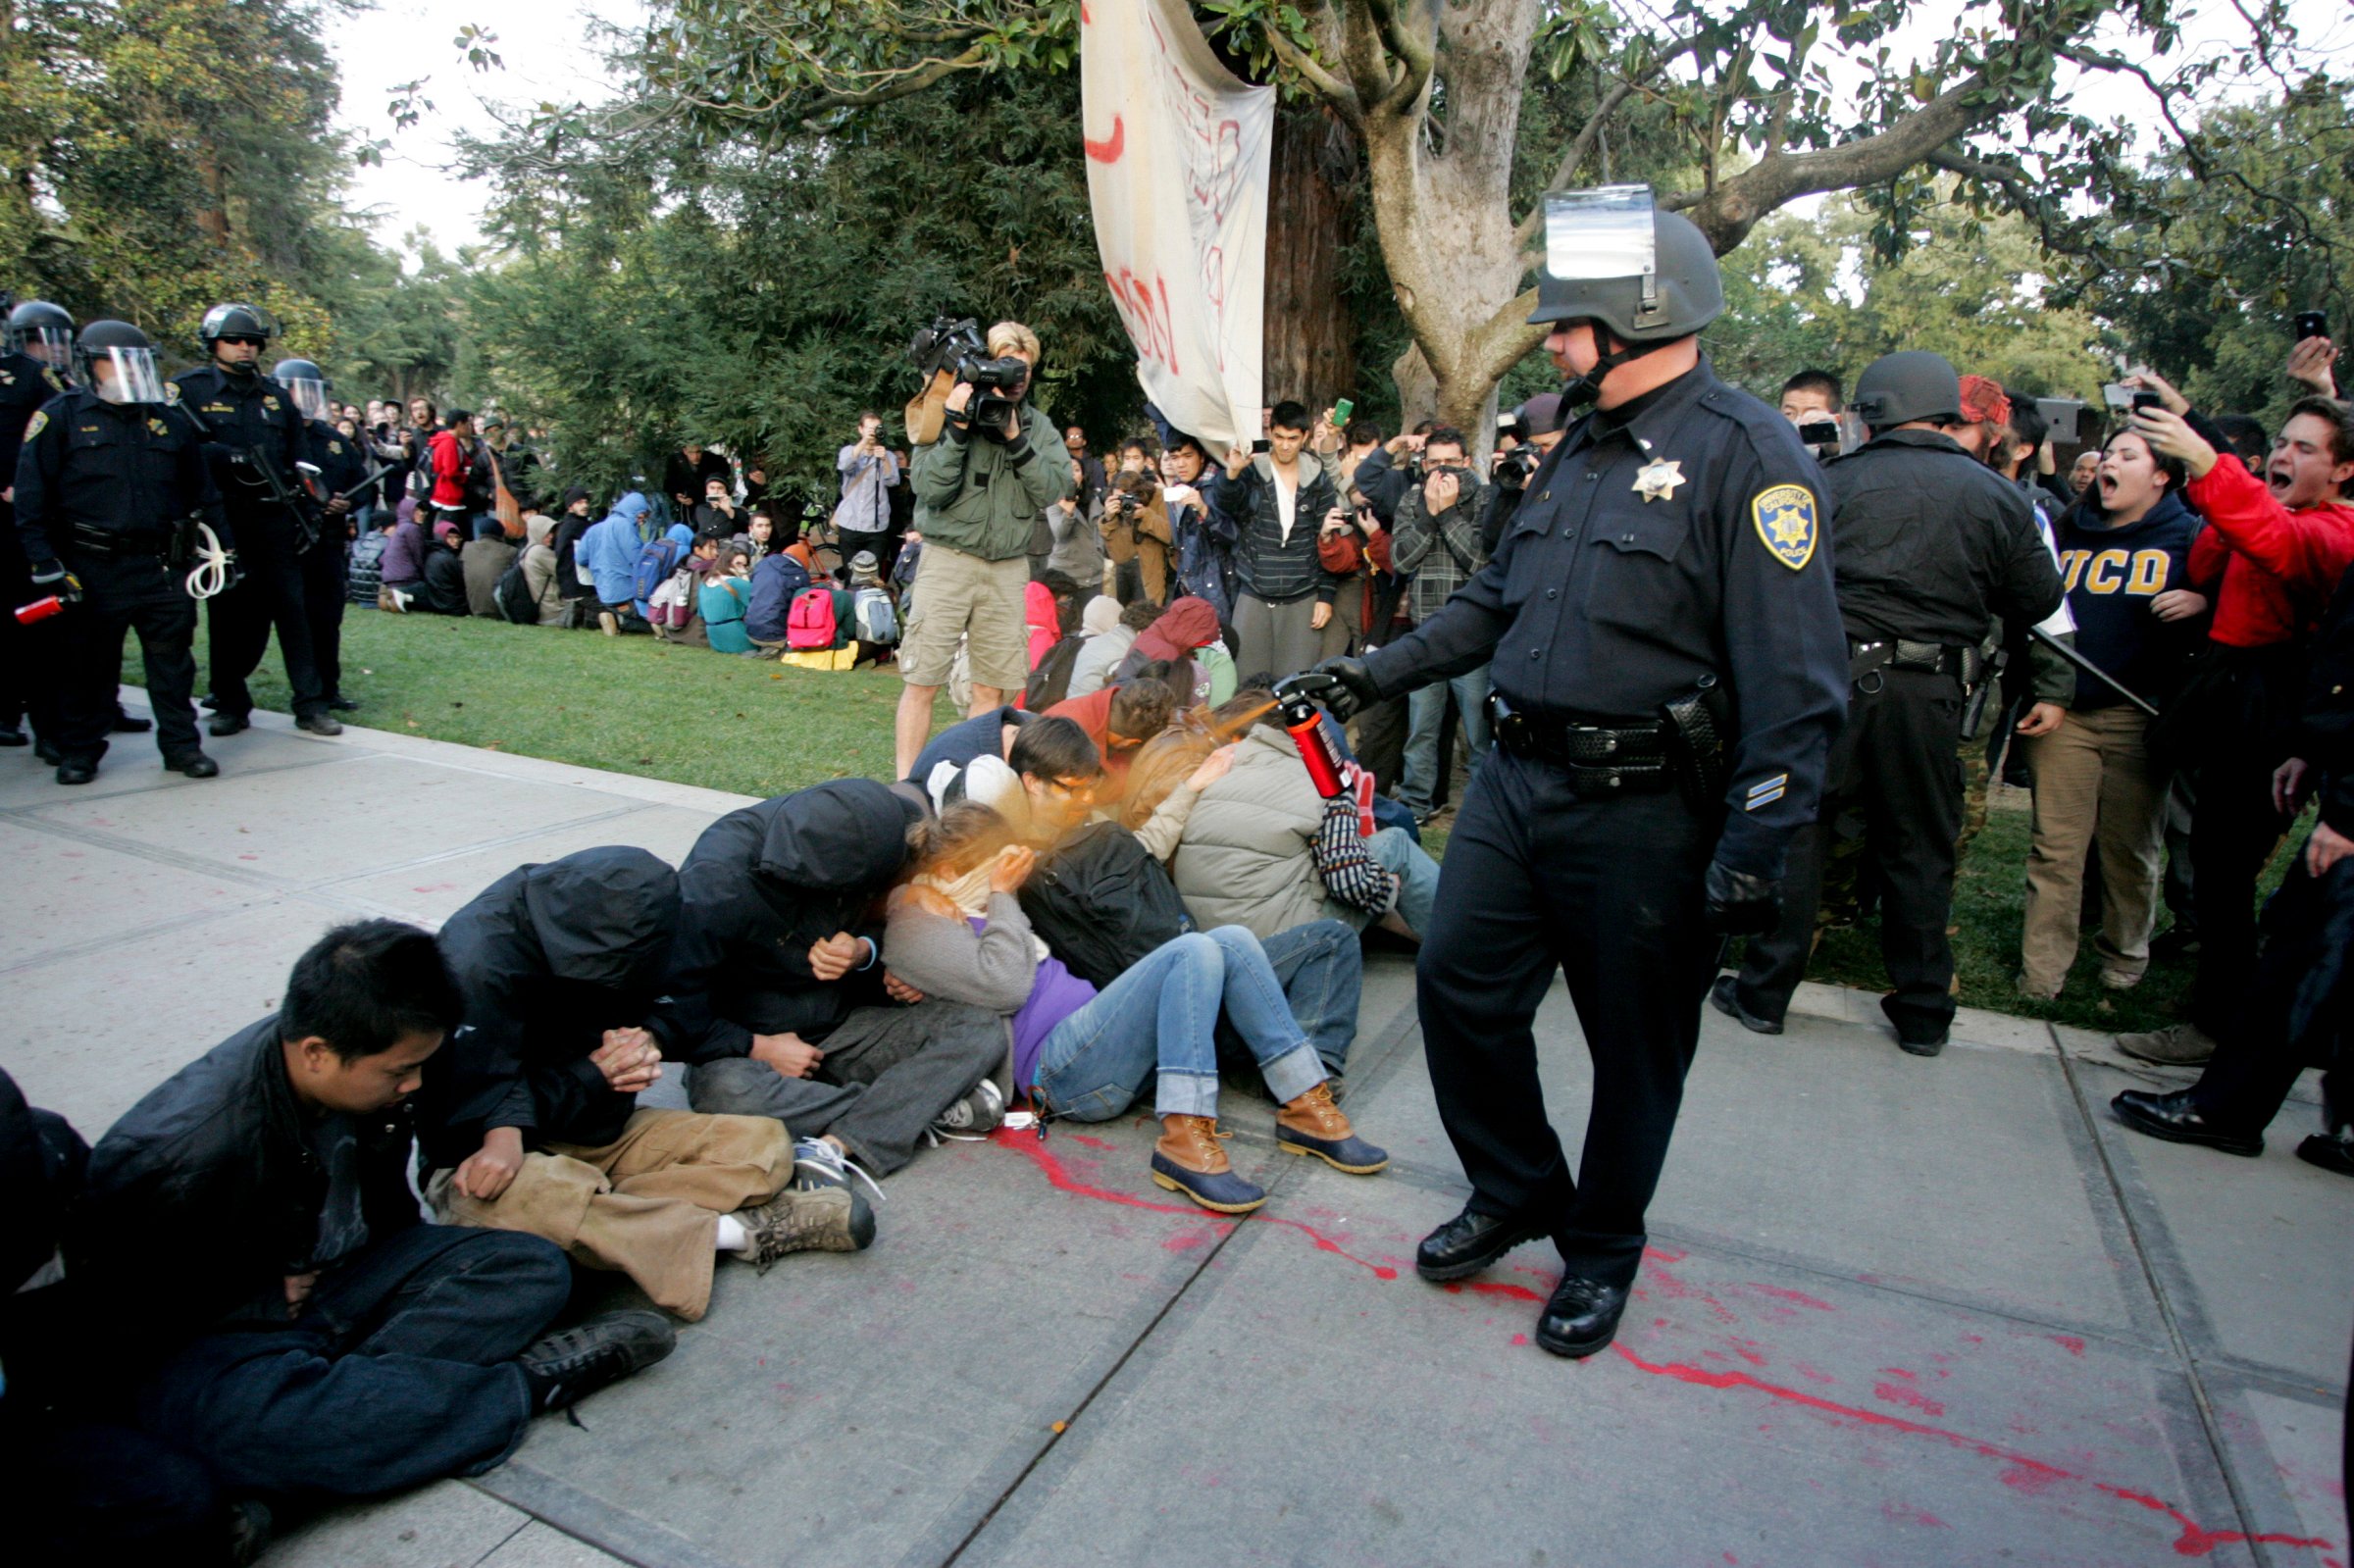 A University of California Davis police officer pepper-sprays students during their sit-in at an "Occupy UCD" demonstration in Davis, Calif. on Nov. 18, 2011.